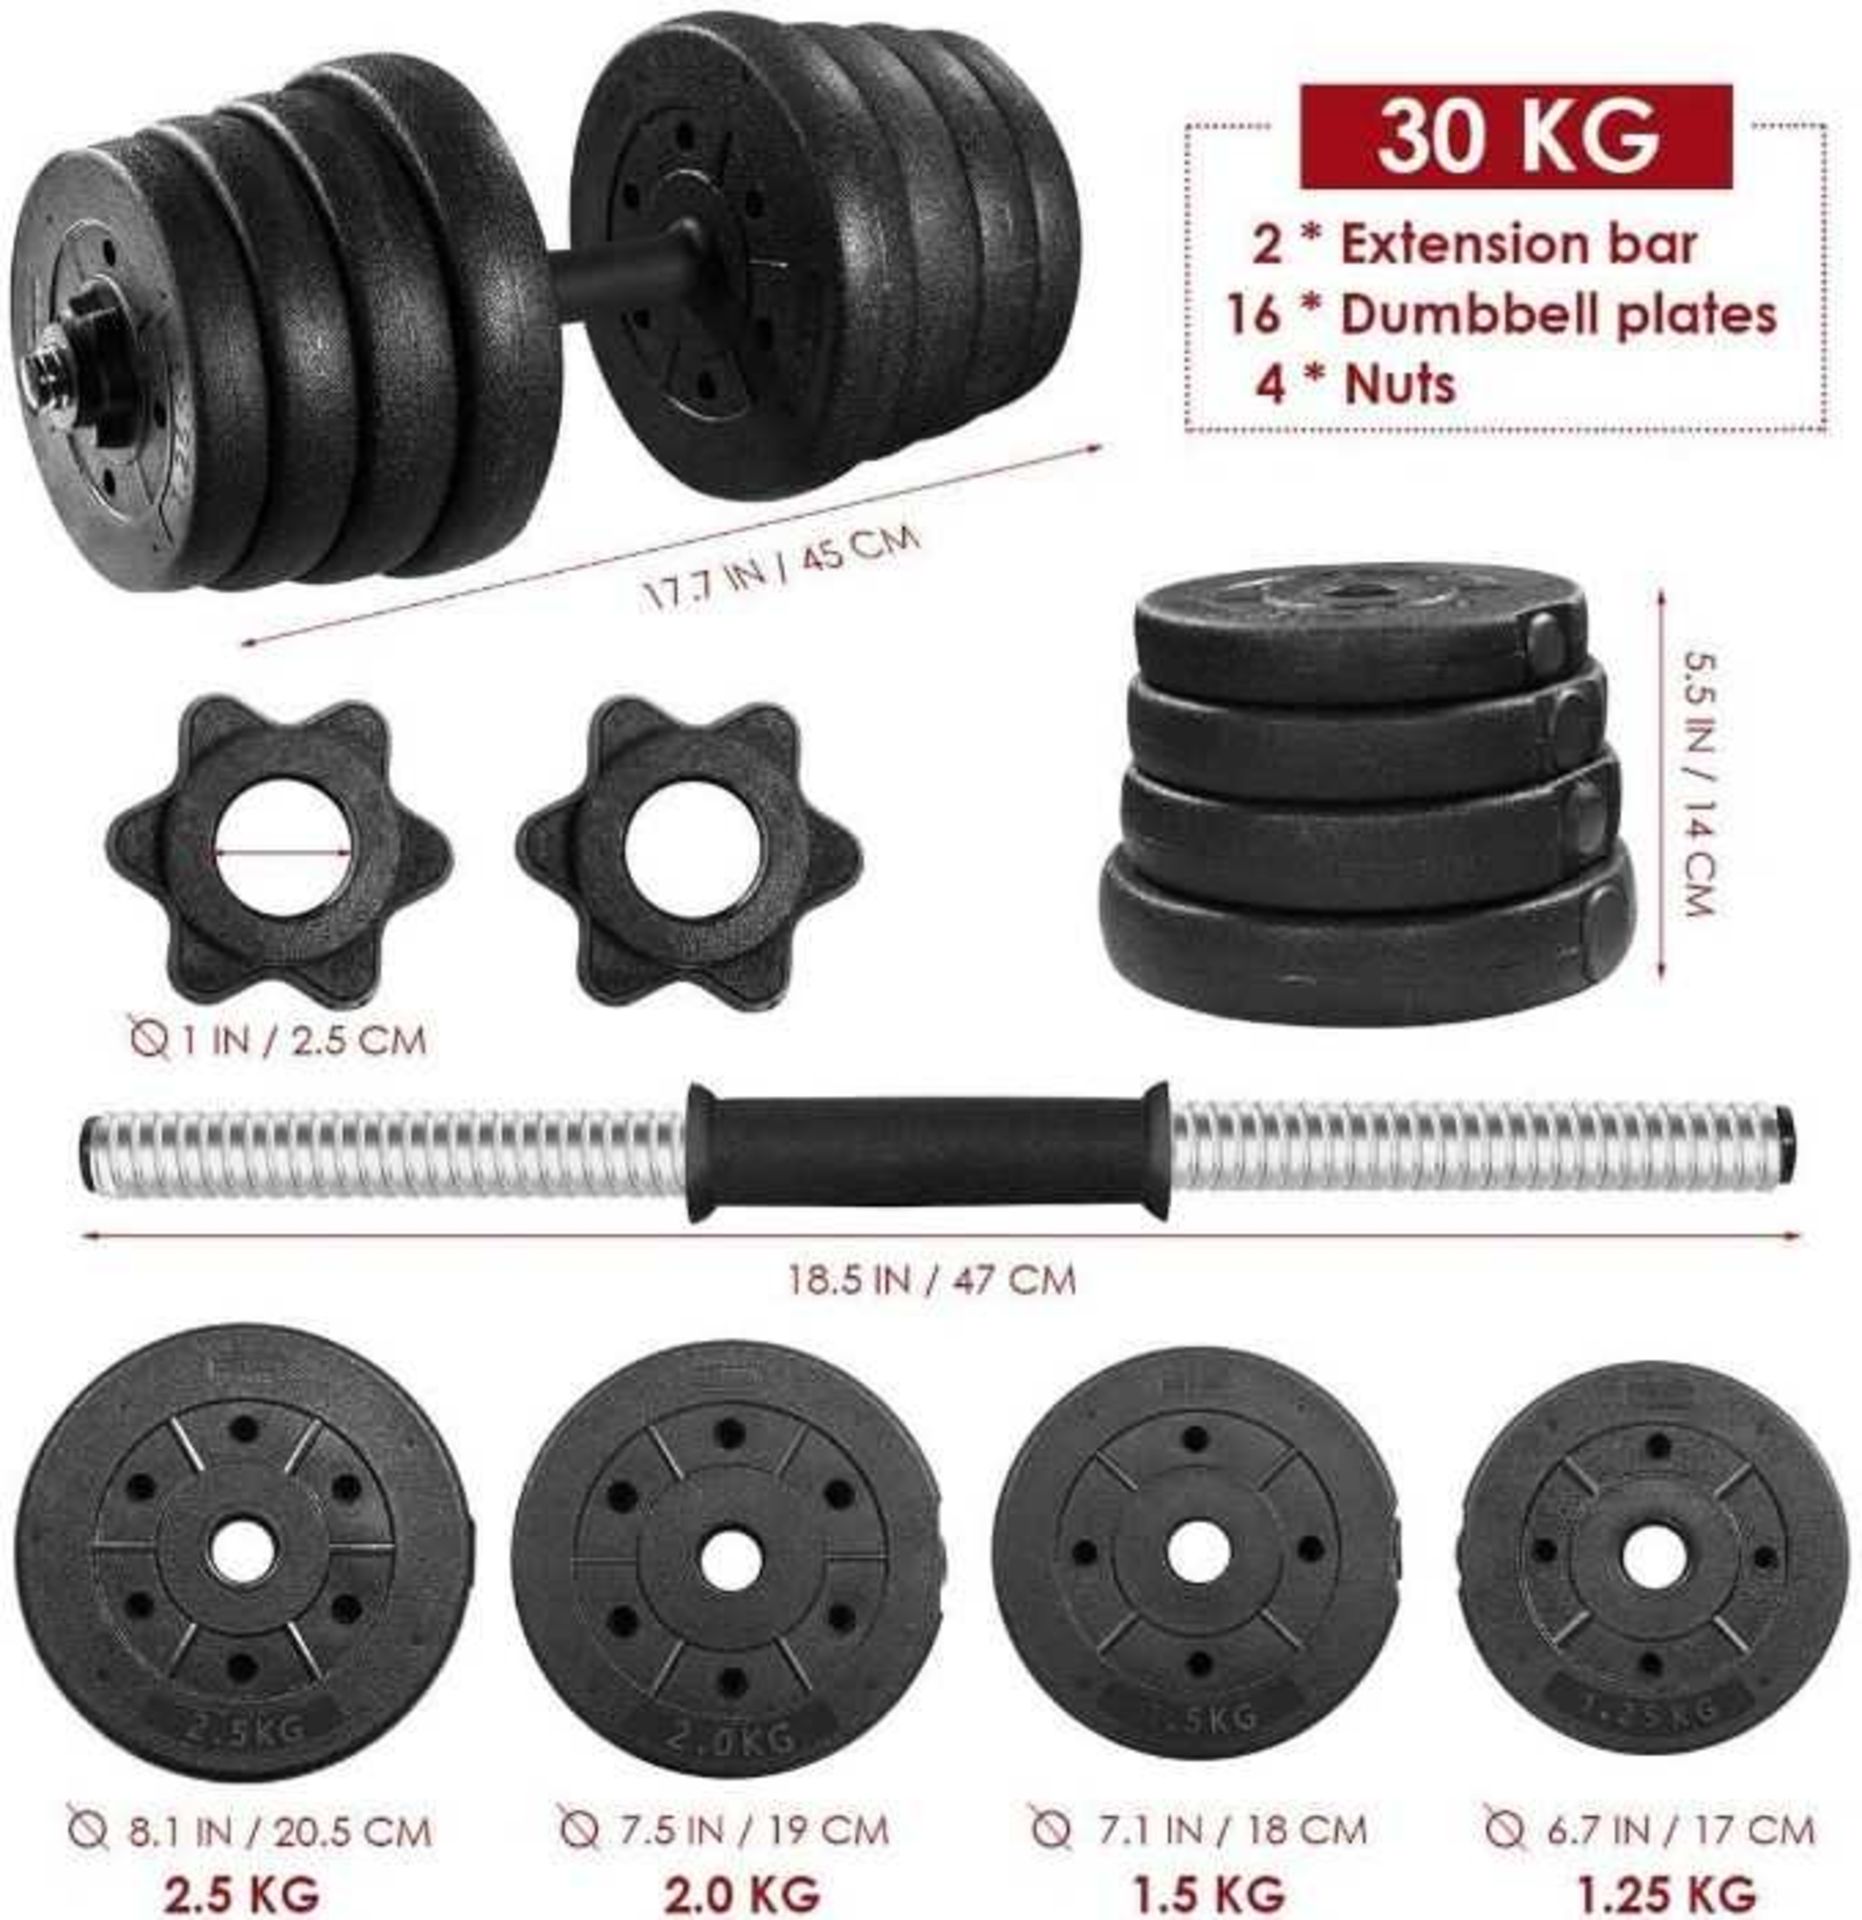 VAT 1x Movtotop 30KG adjustable Dumb Bell weight set, new and boxed, we can only find these in - Image 6 of 6